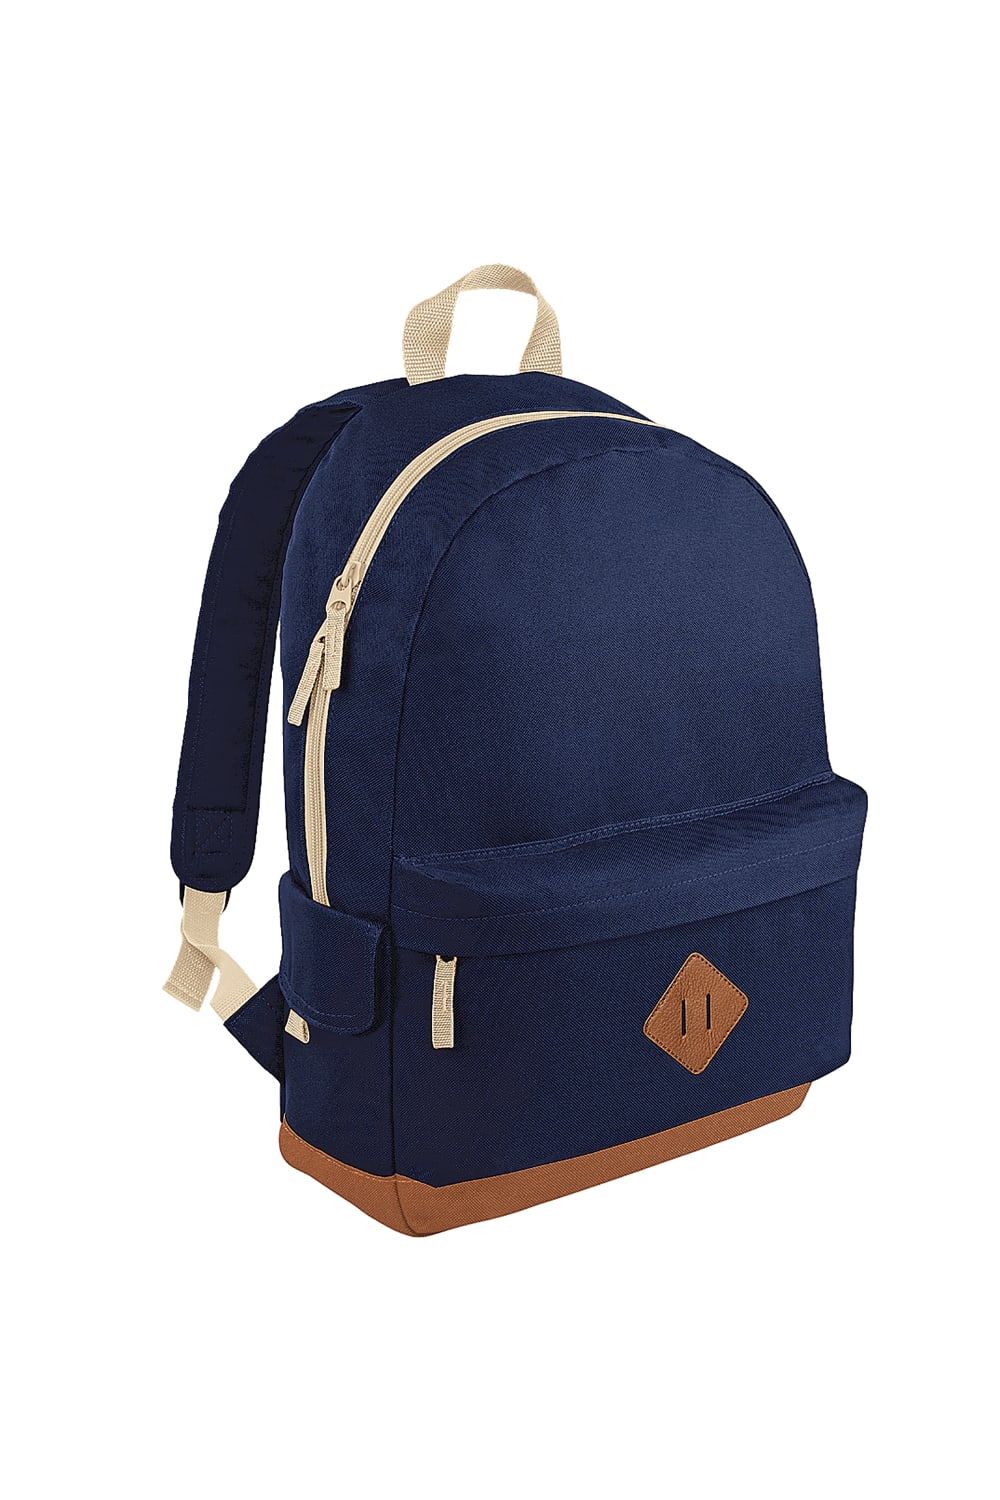 Bagbase Heritage Retro Backpack/Rucksack/Bag (18 Litres) (Pack of 2) (French Navy) (One Size)